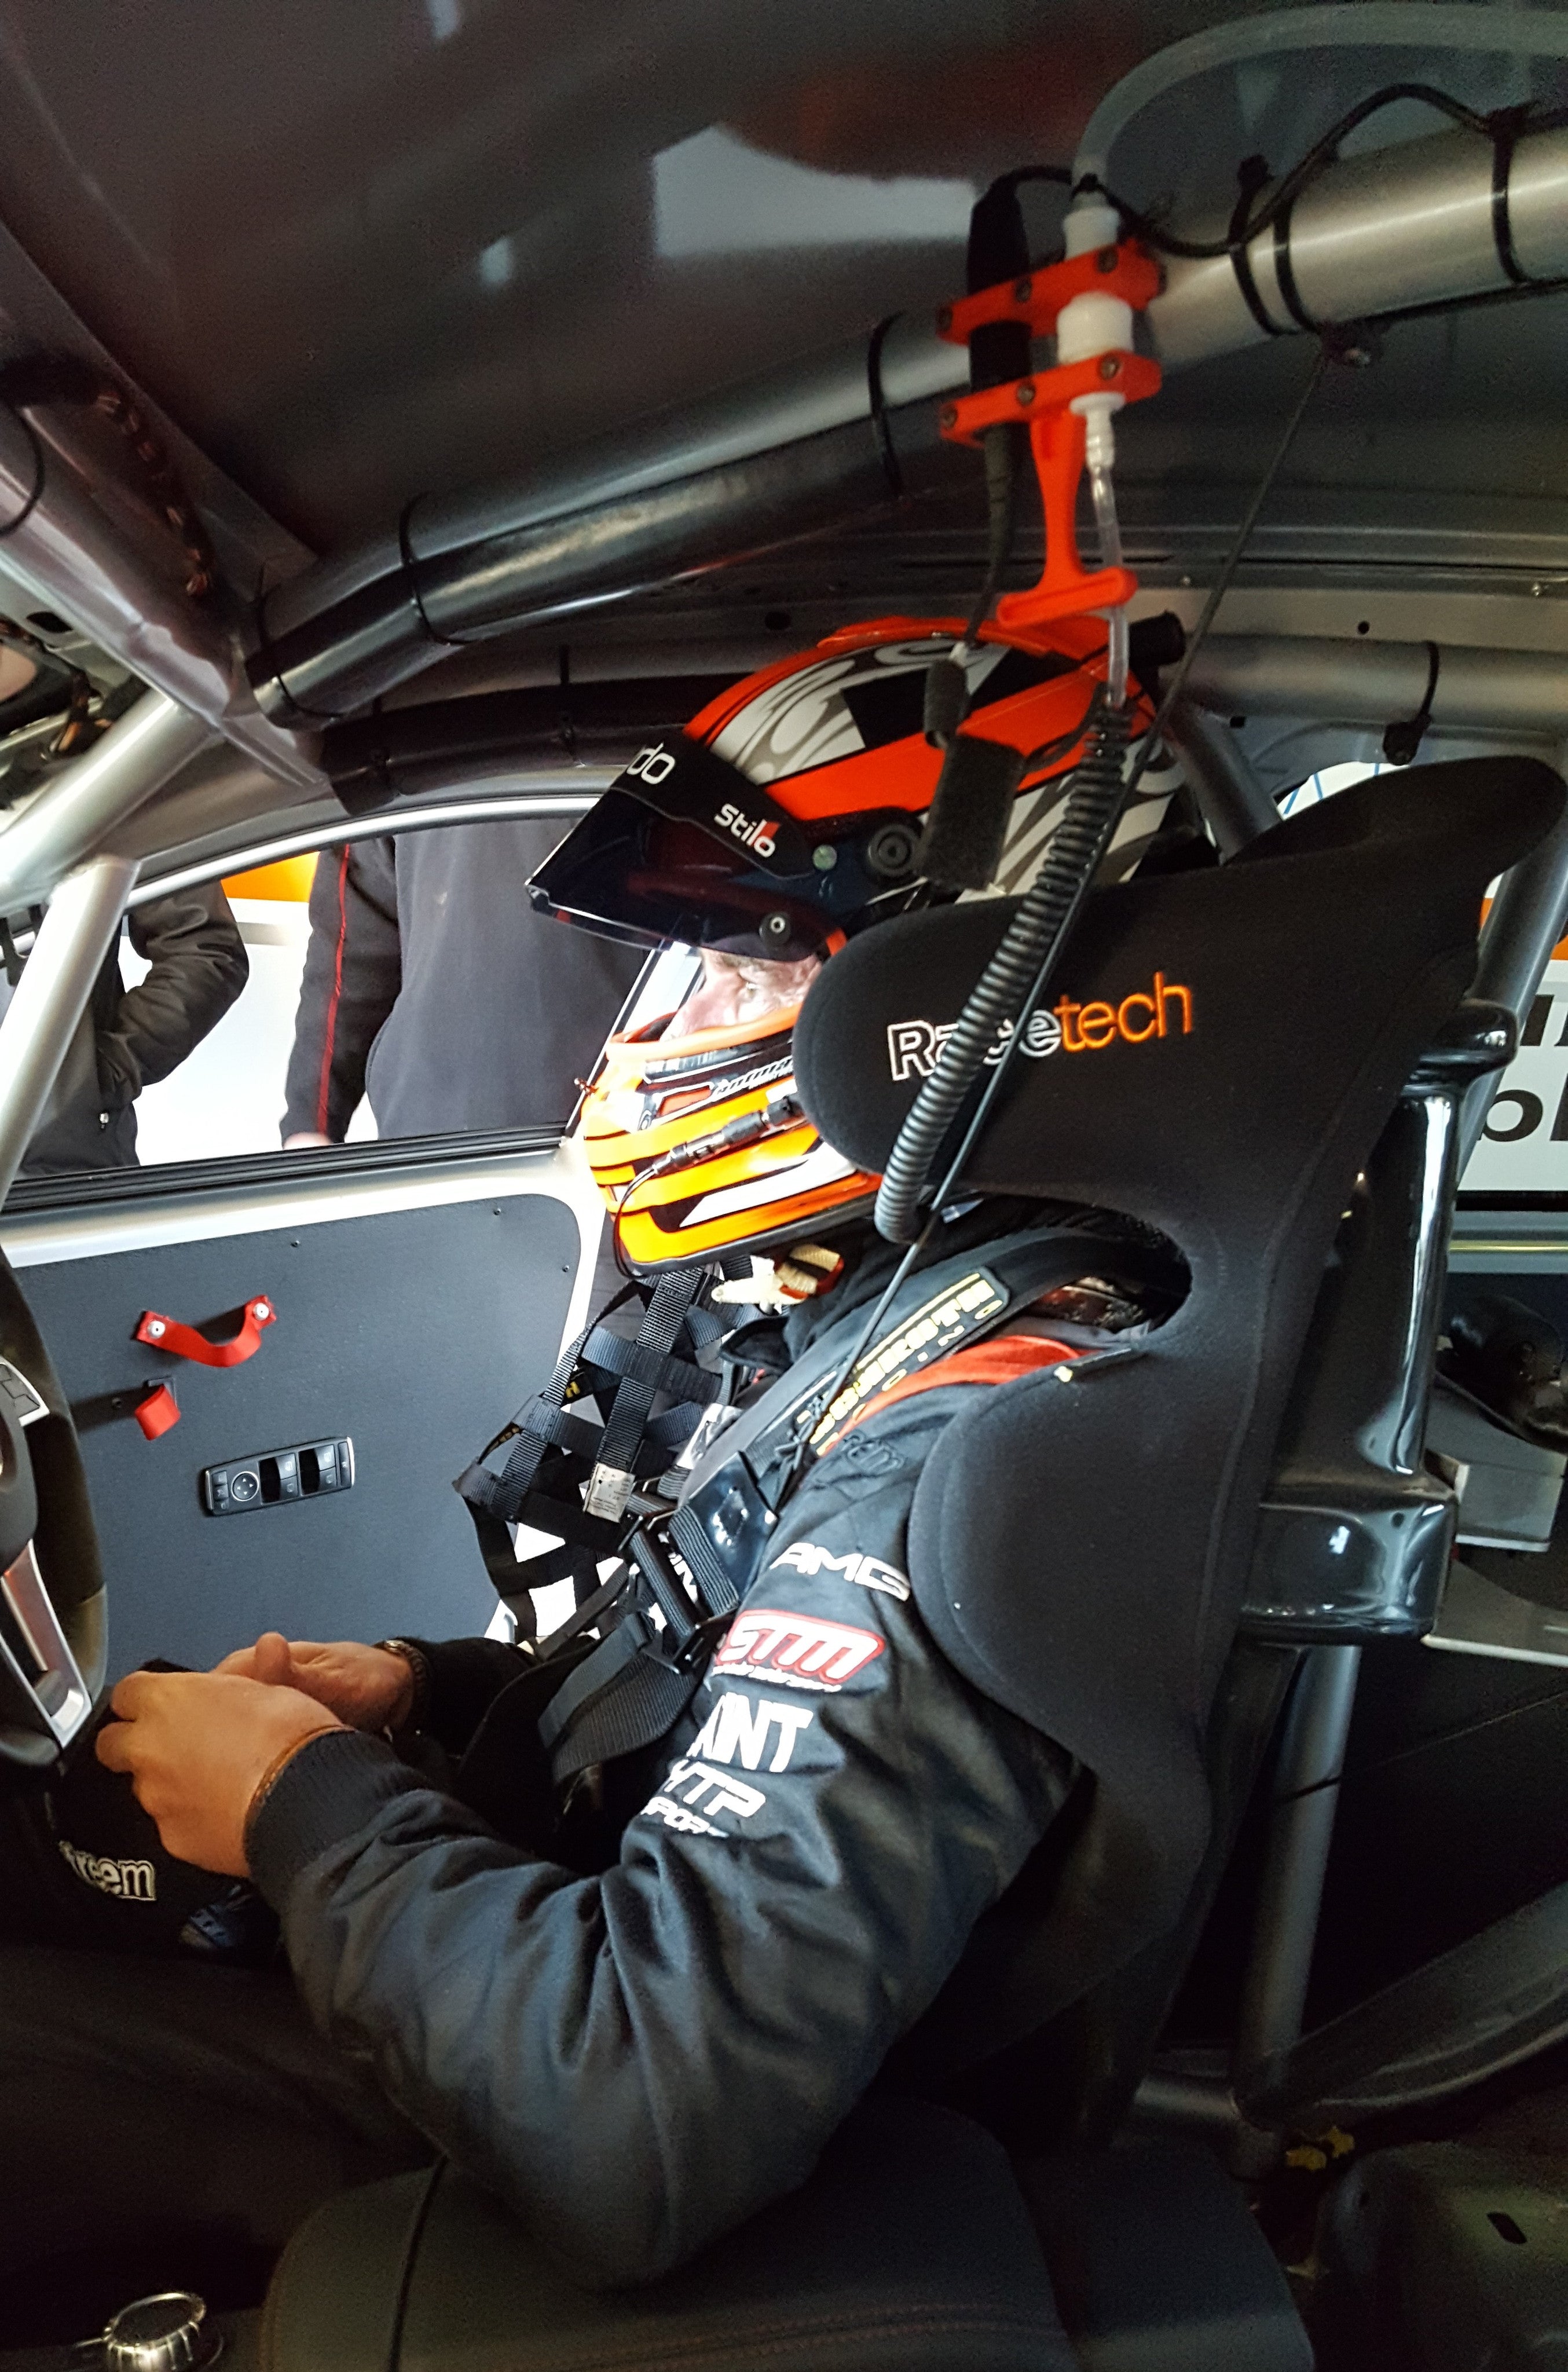 Craig Baird using rampage race products in a Mercedes AMG A45 at Bathurst 6hr production car race